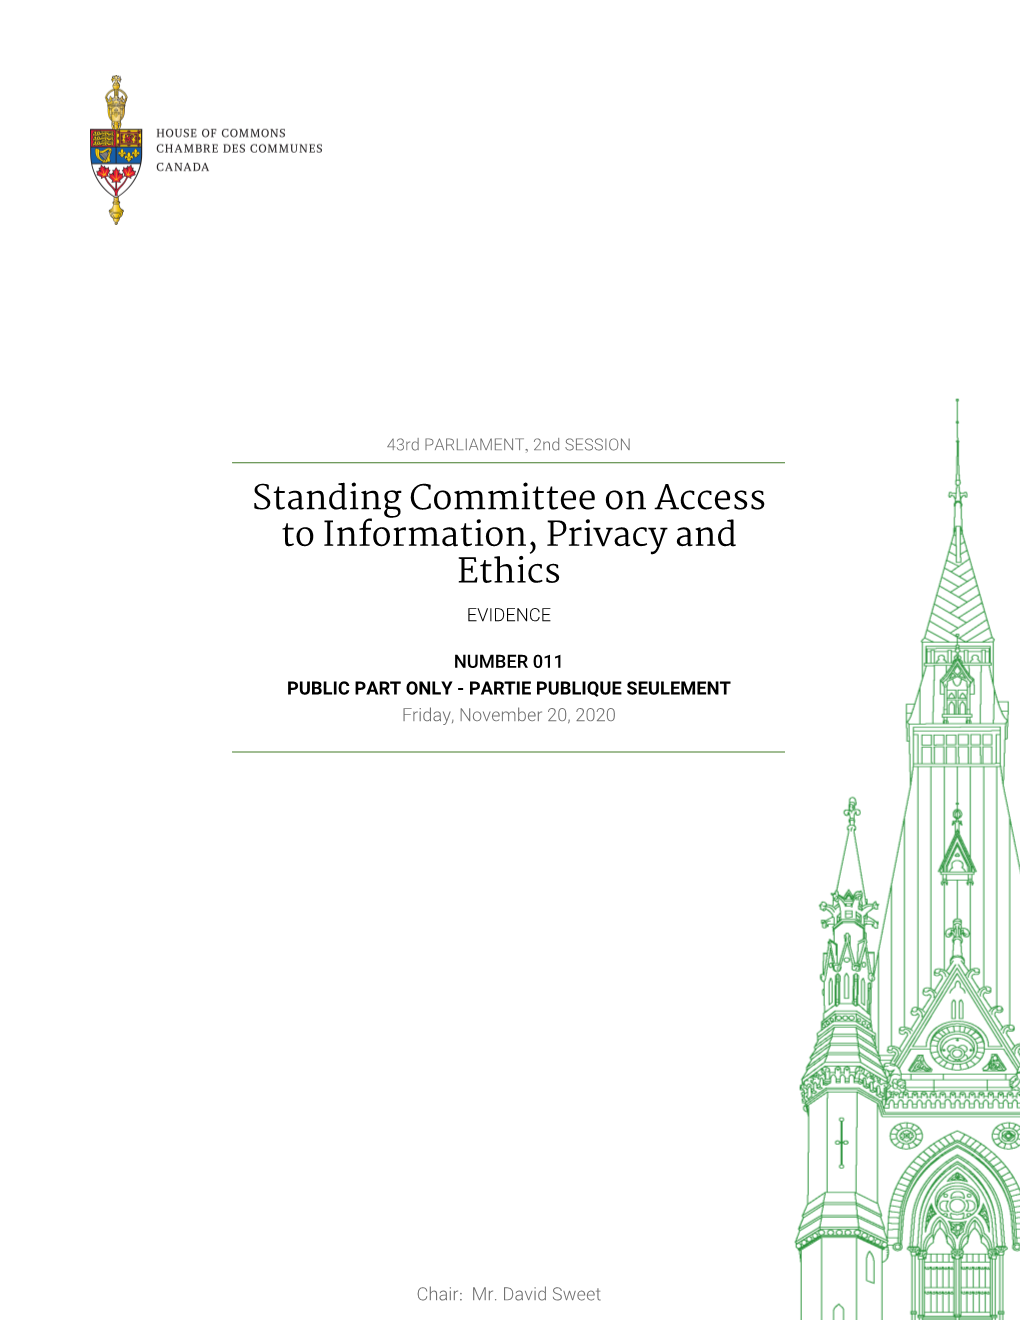 Evidence of the Standing Committee on Access To